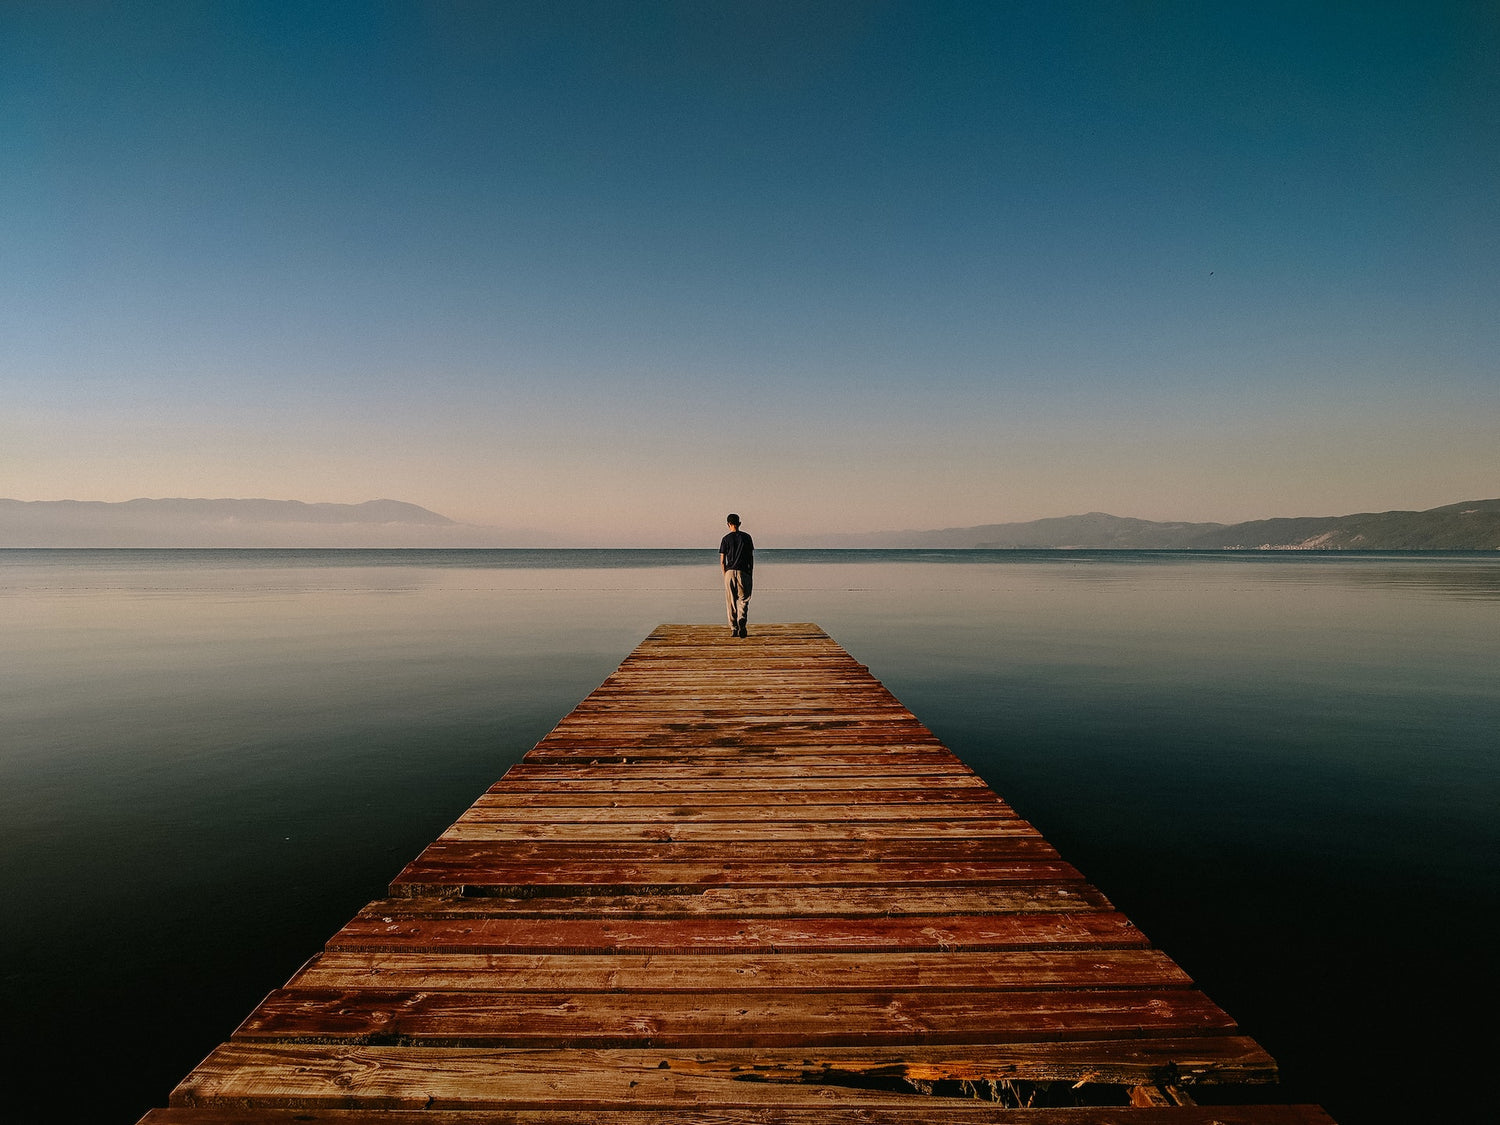 man standing on the edge of the pier over lake background Photo by Adib Harith Fadzilah on Unsplash